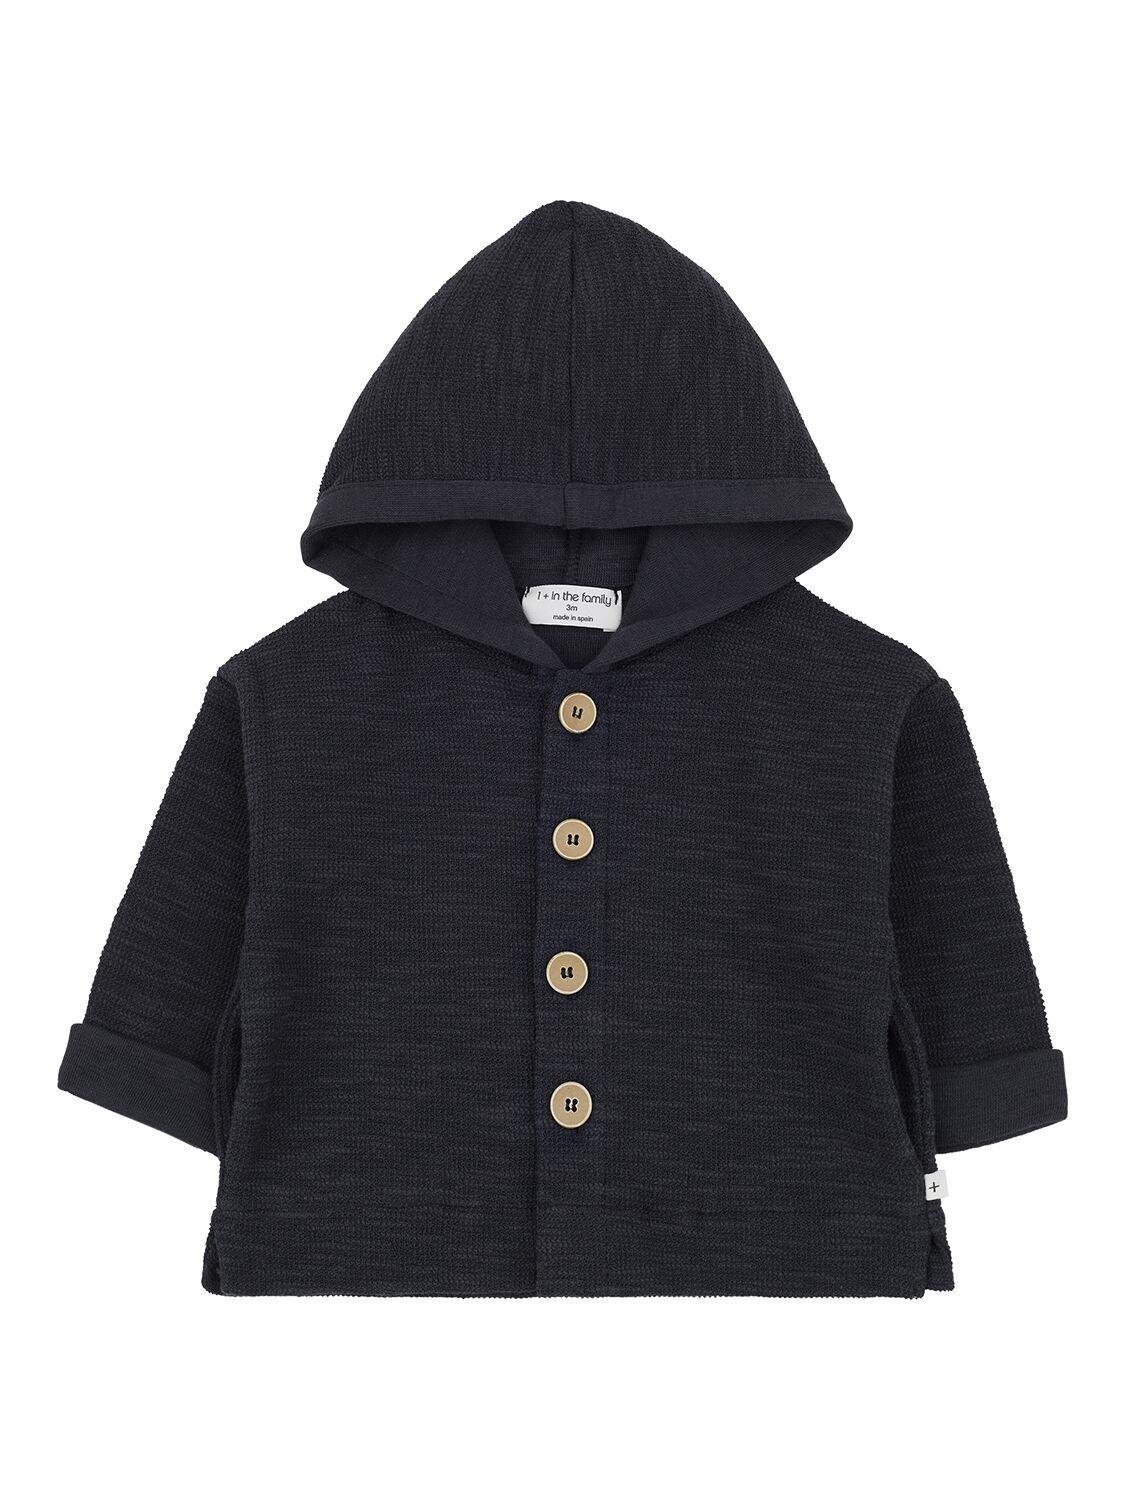 Cotton Blend Hooded Jacket by 1 + IN THE FAMILY